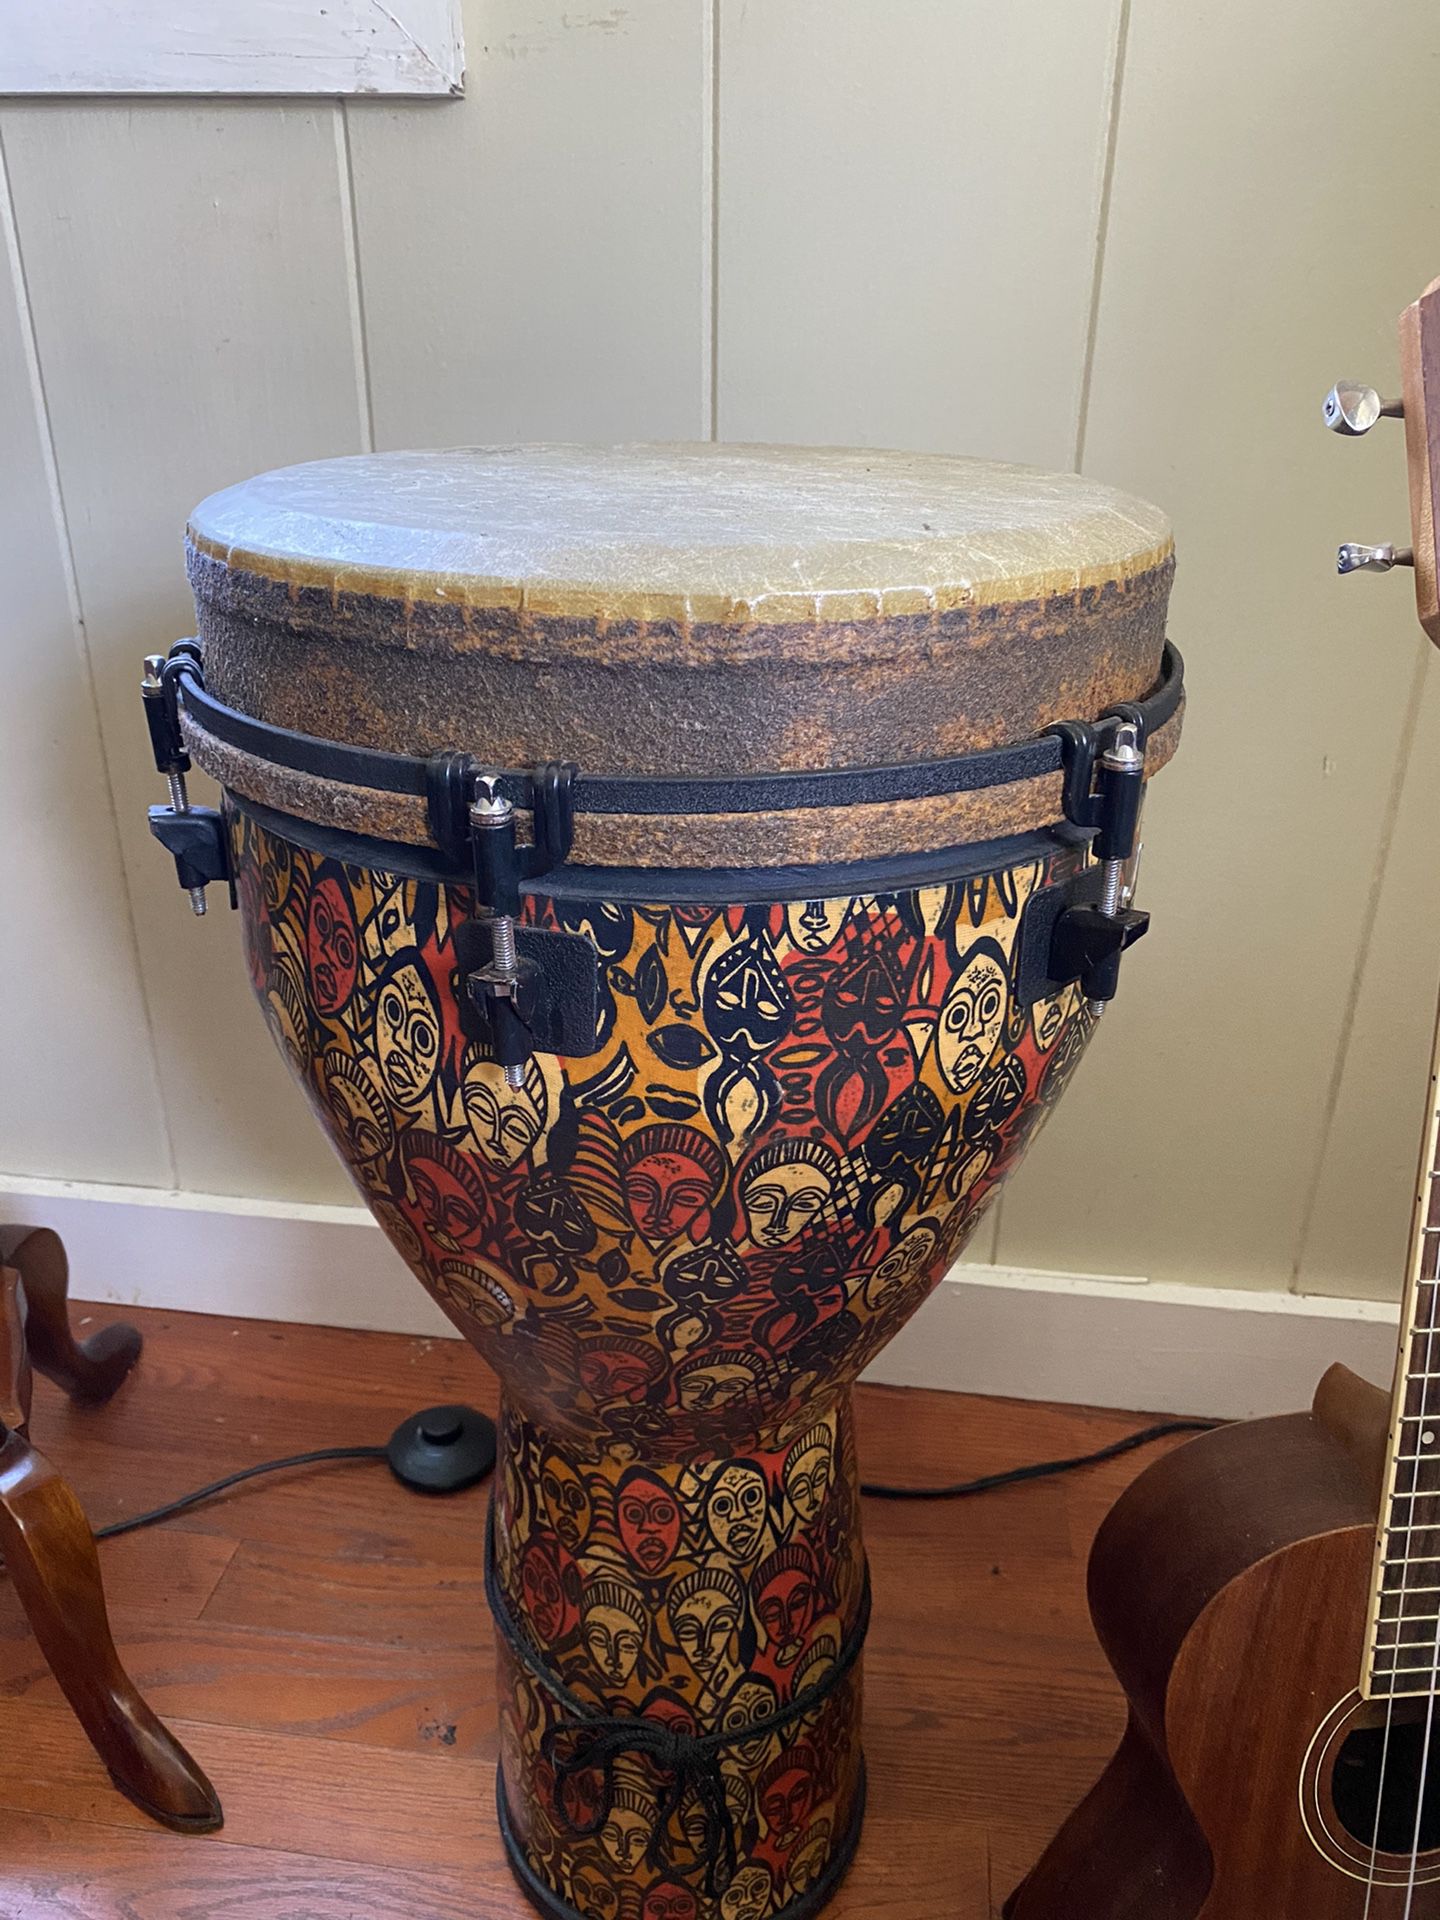 Remo djembe 12”